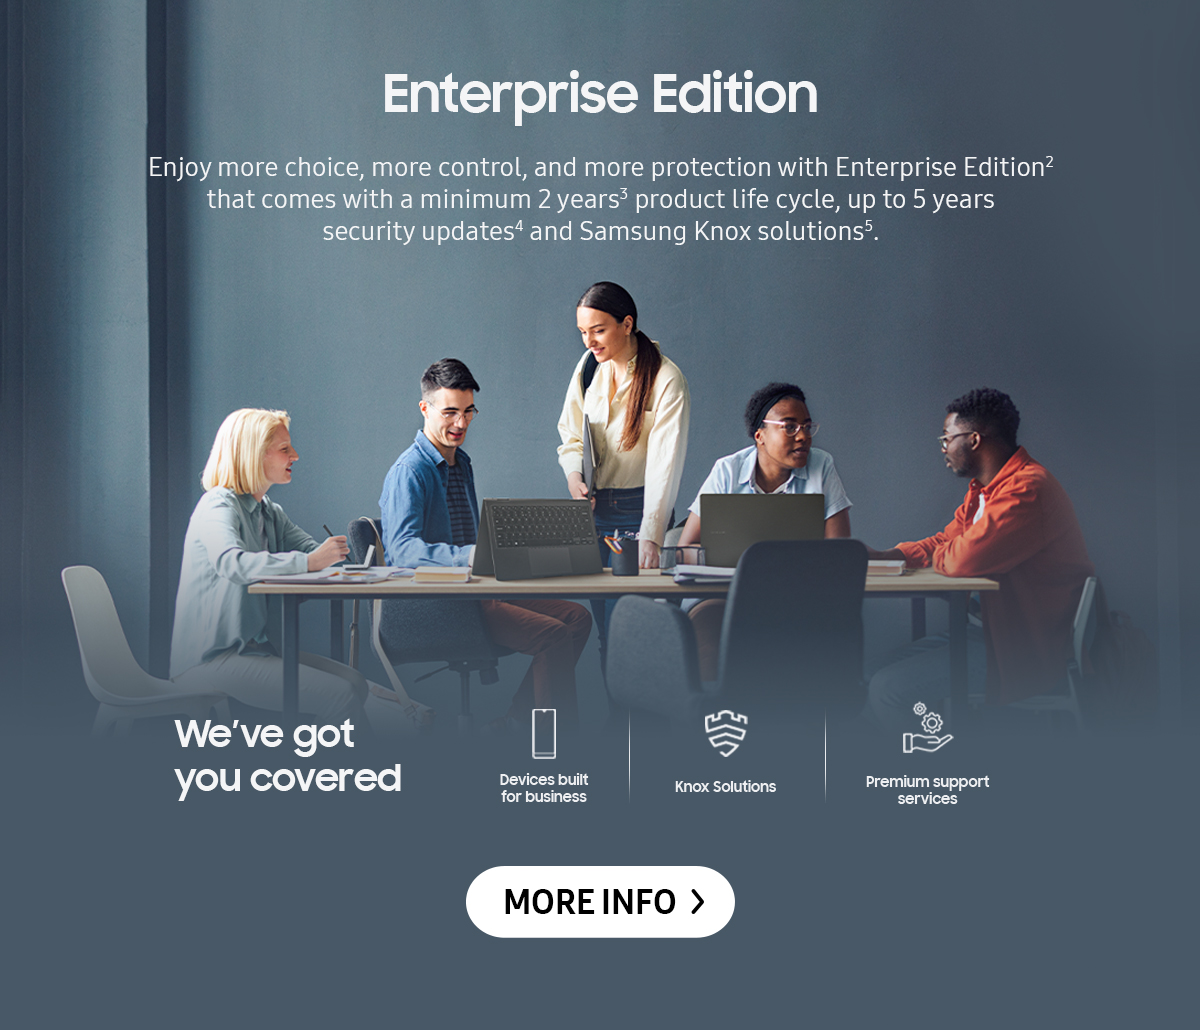 Enterprise Edition | Enjoy more choice, more control, and more protection with Enterprise Edition that comes with a minimum 2 years product life cycle, up to 5 years security updates and Samsung Knox solutions. Click here to discover more!